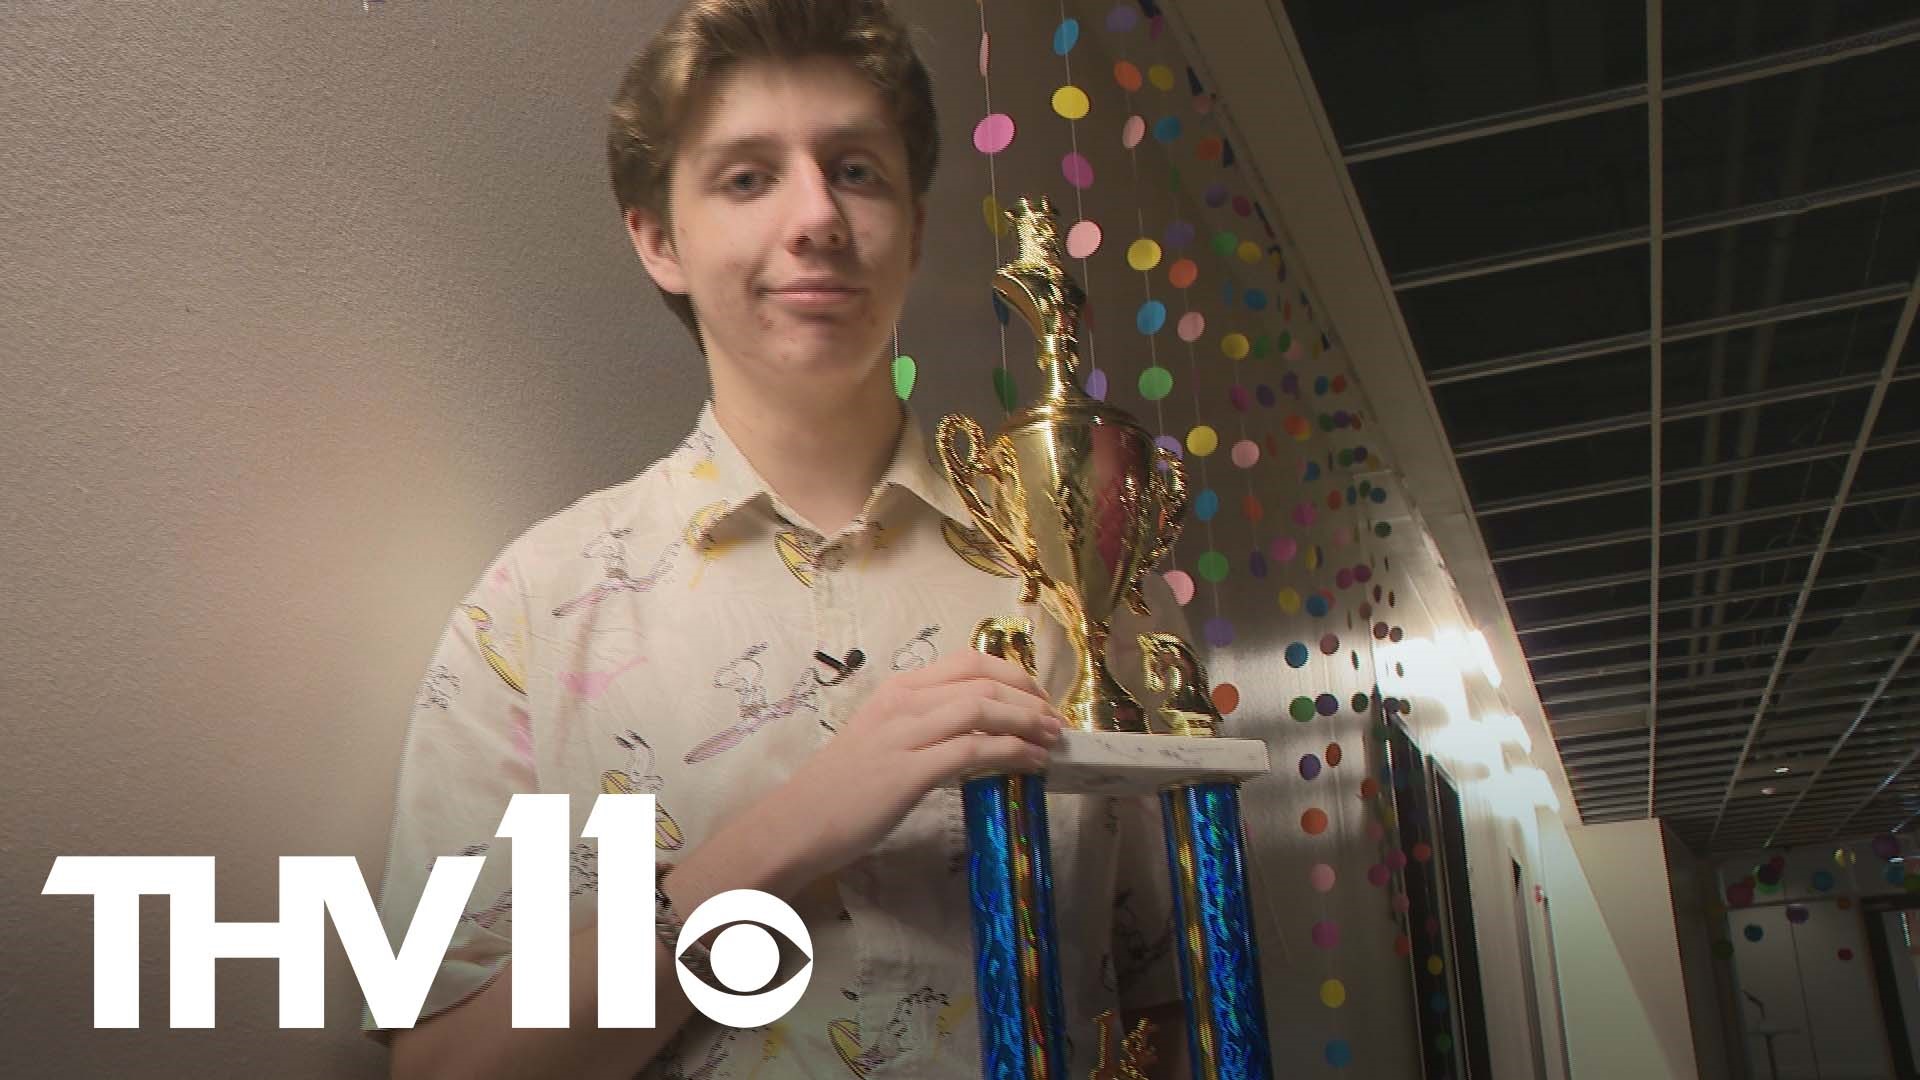 16-year-old William is an up-and-coming chess star, winning the state championship this year and hoping to defend his title in 2023.